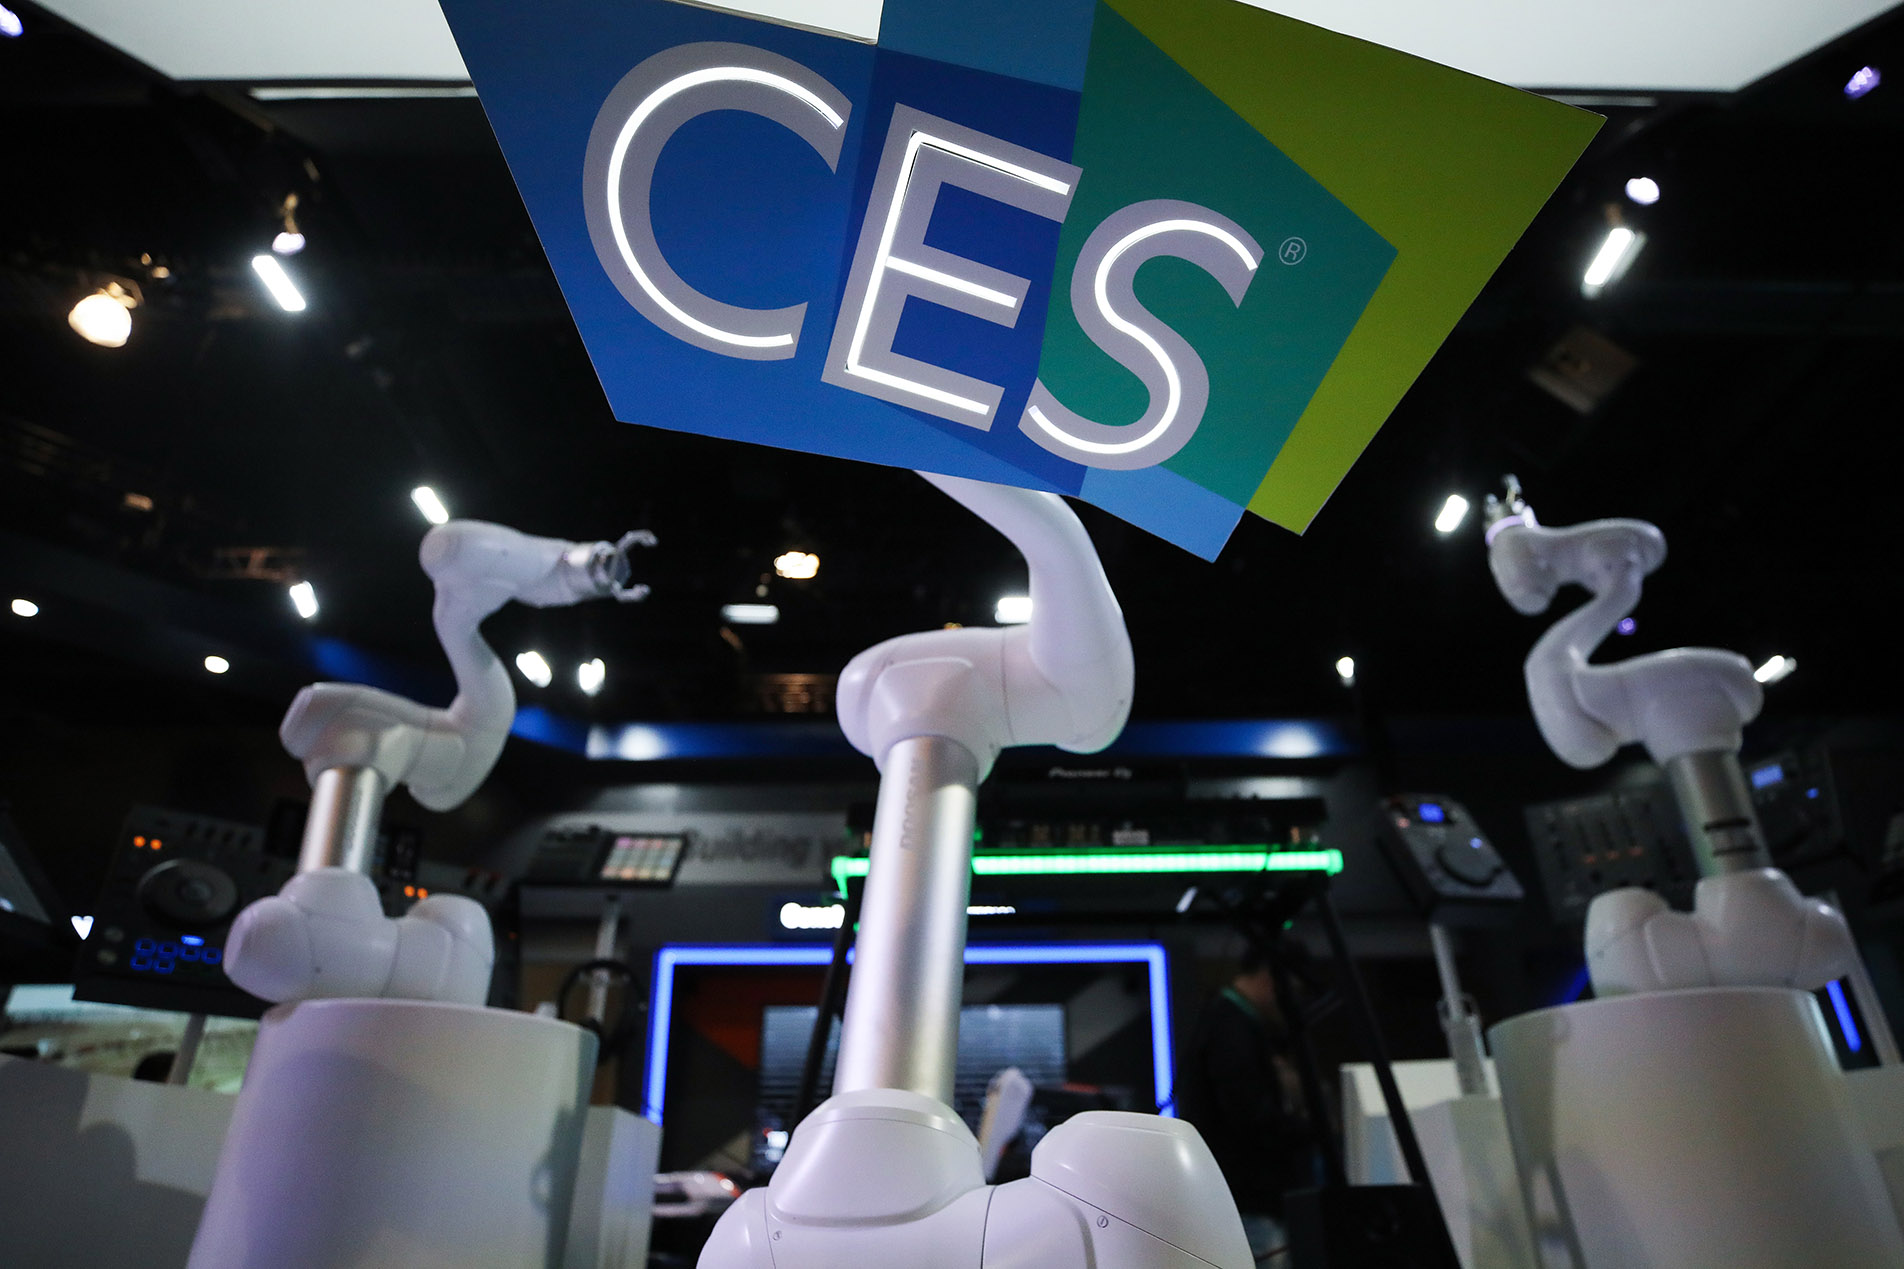 Latest Consumer Technology Products On Display At Annual CES In Las Vegas.